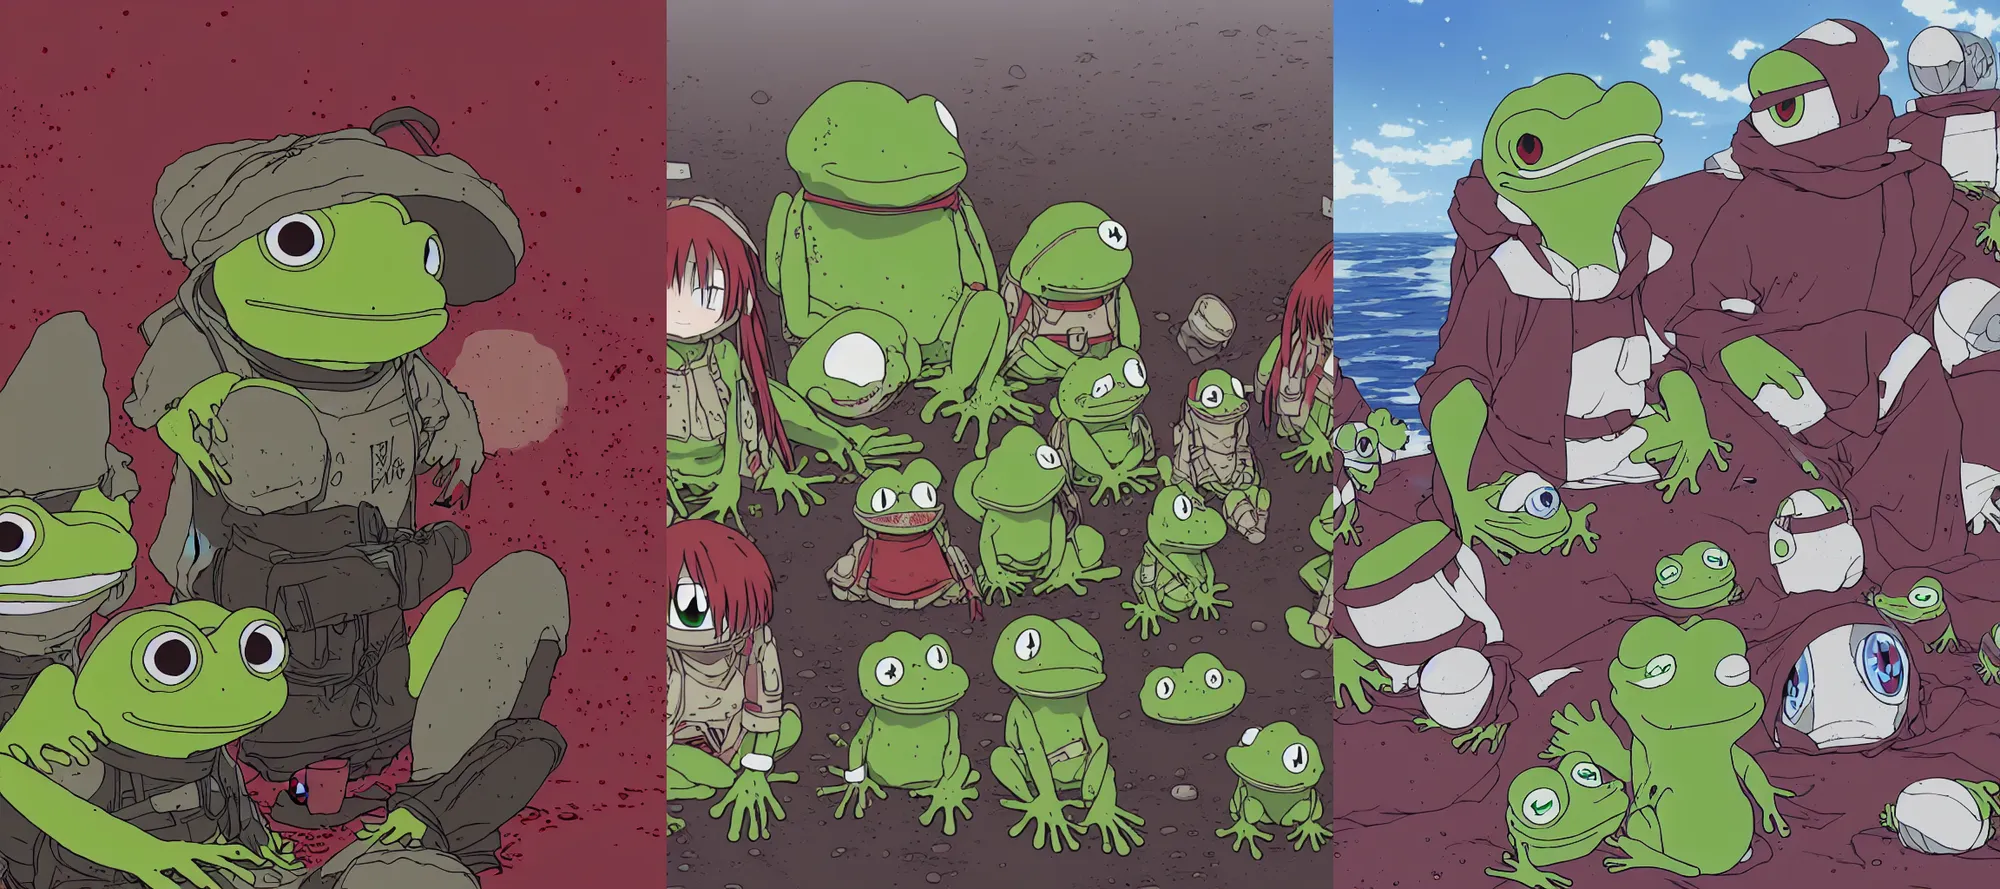 Prompt: resolution 4k made in abyss design Akihito Tsukushi design body pepe the frog war bloody war wounded frogs sea of blood Cold war S.T.A.L.K.E.R a bloody conflict visceral military sitting by an ocean of blood the group of pepes sitting at the shore dream like end of evangelion , fractals , pepe the frogs at war, art in the style of and Oleg Vdovenko and Akihito Tsukushi ,Stefan Koidl